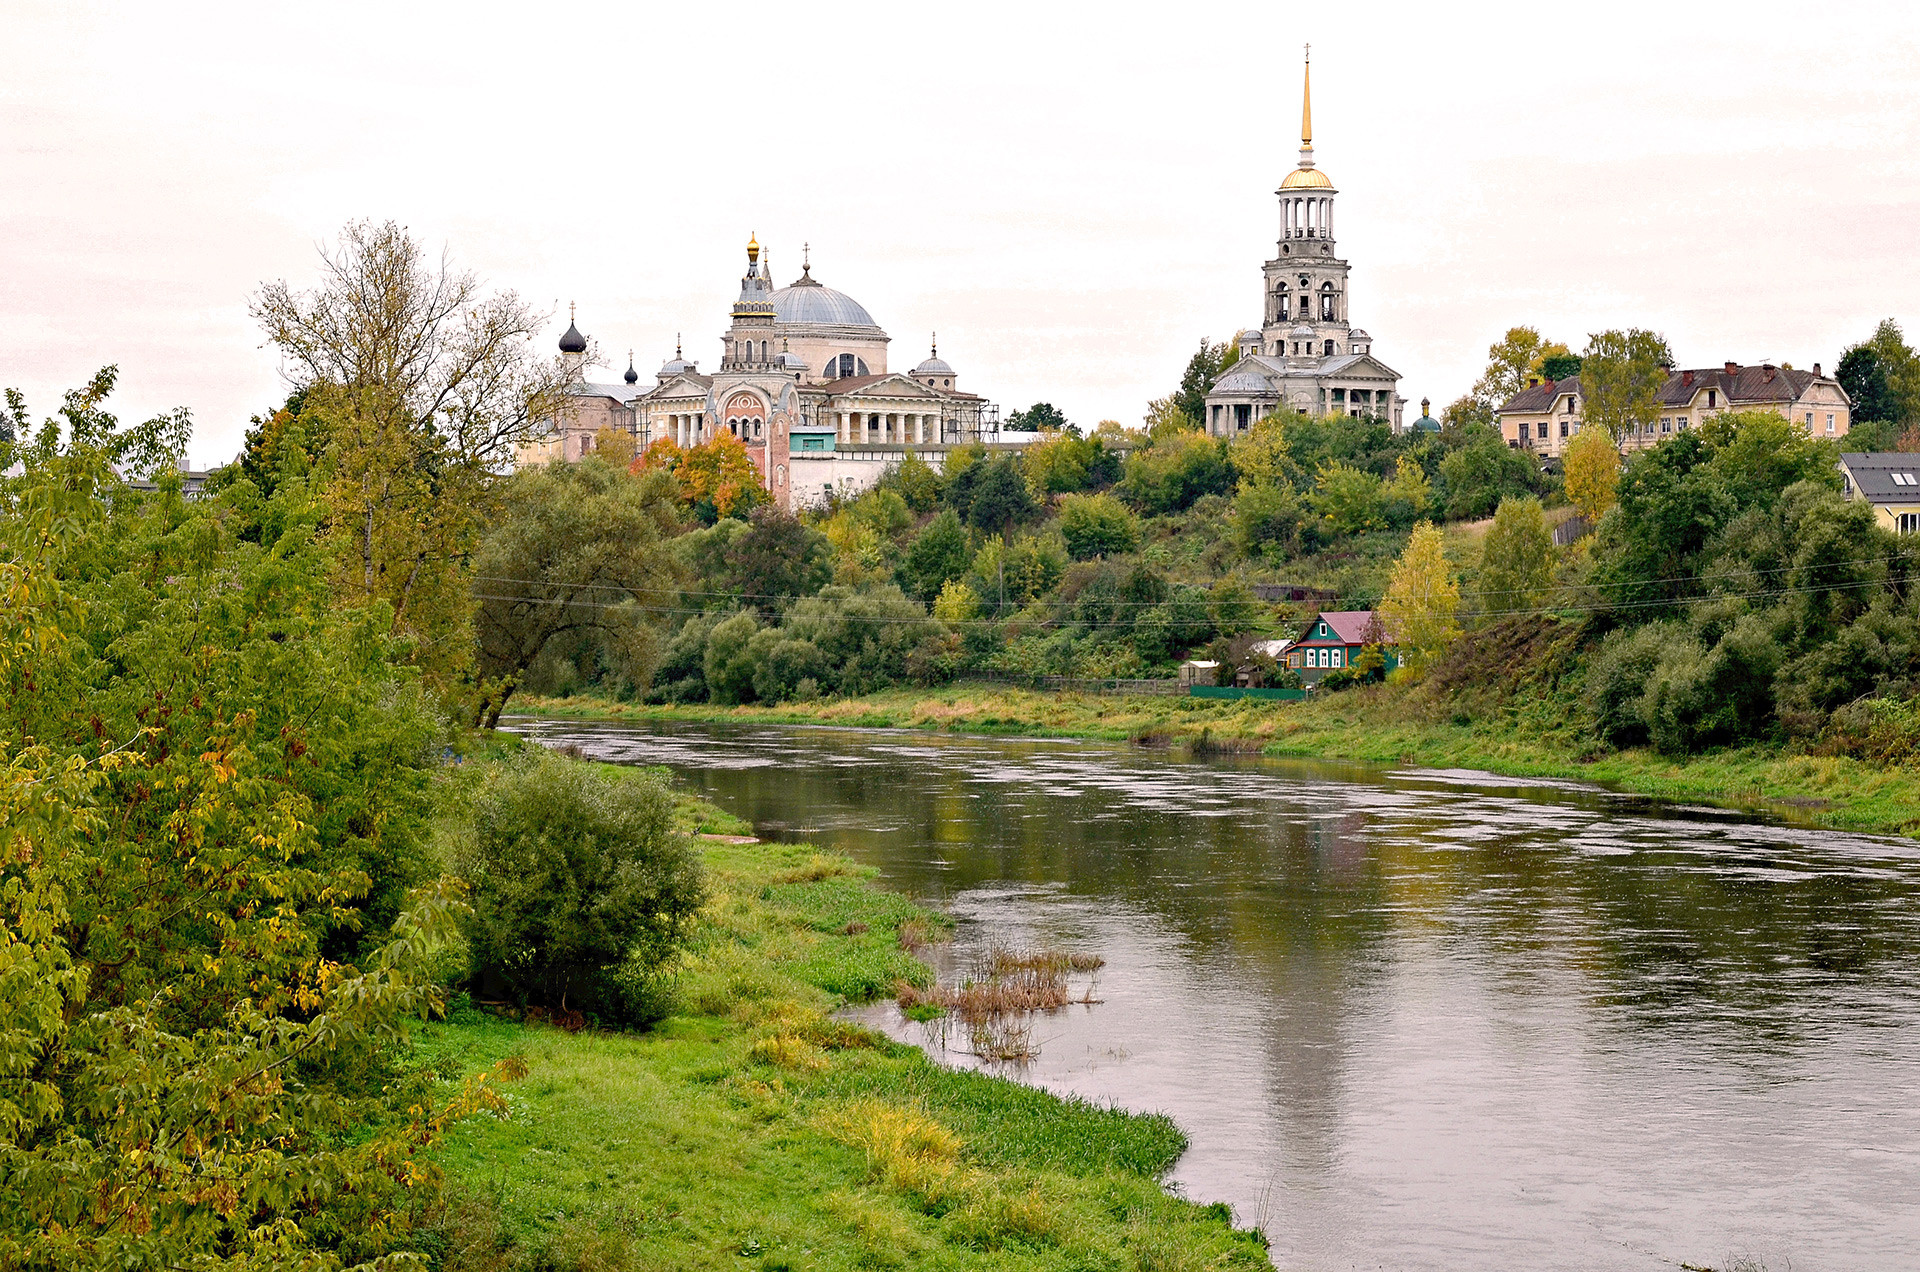 The Monastery of Sts. Boris and Gleb stands high above the river Tvertsa and Torzhok's small but pretty city center.